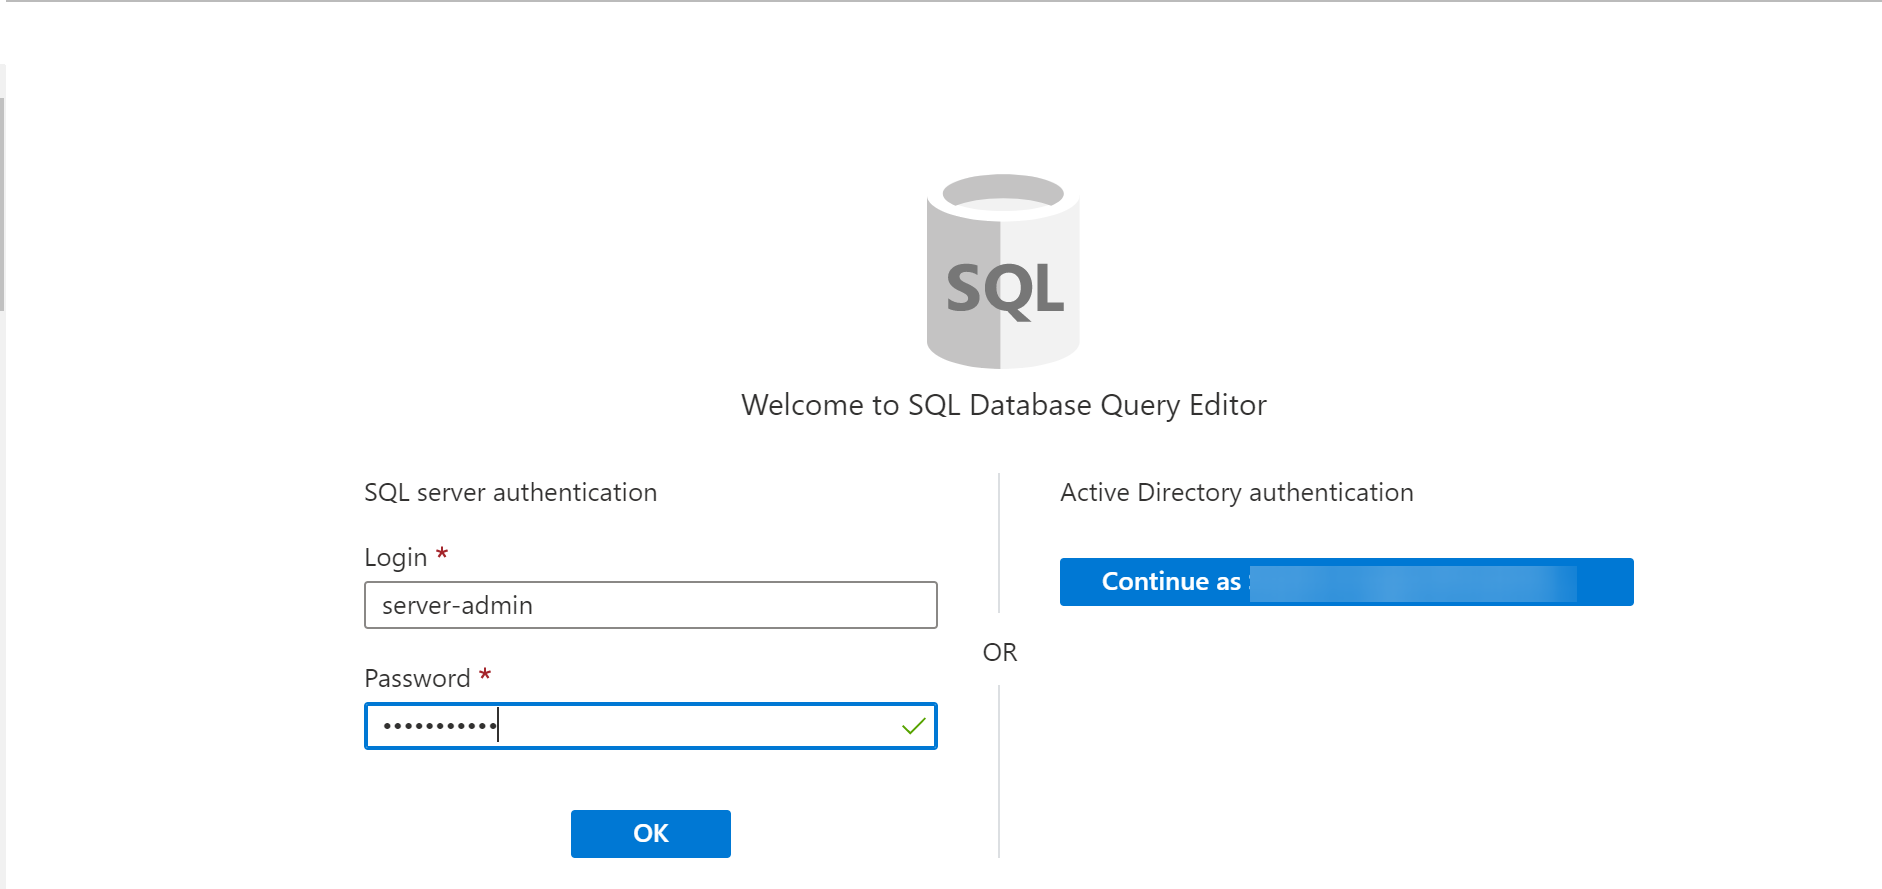 Signing into SQL query editor